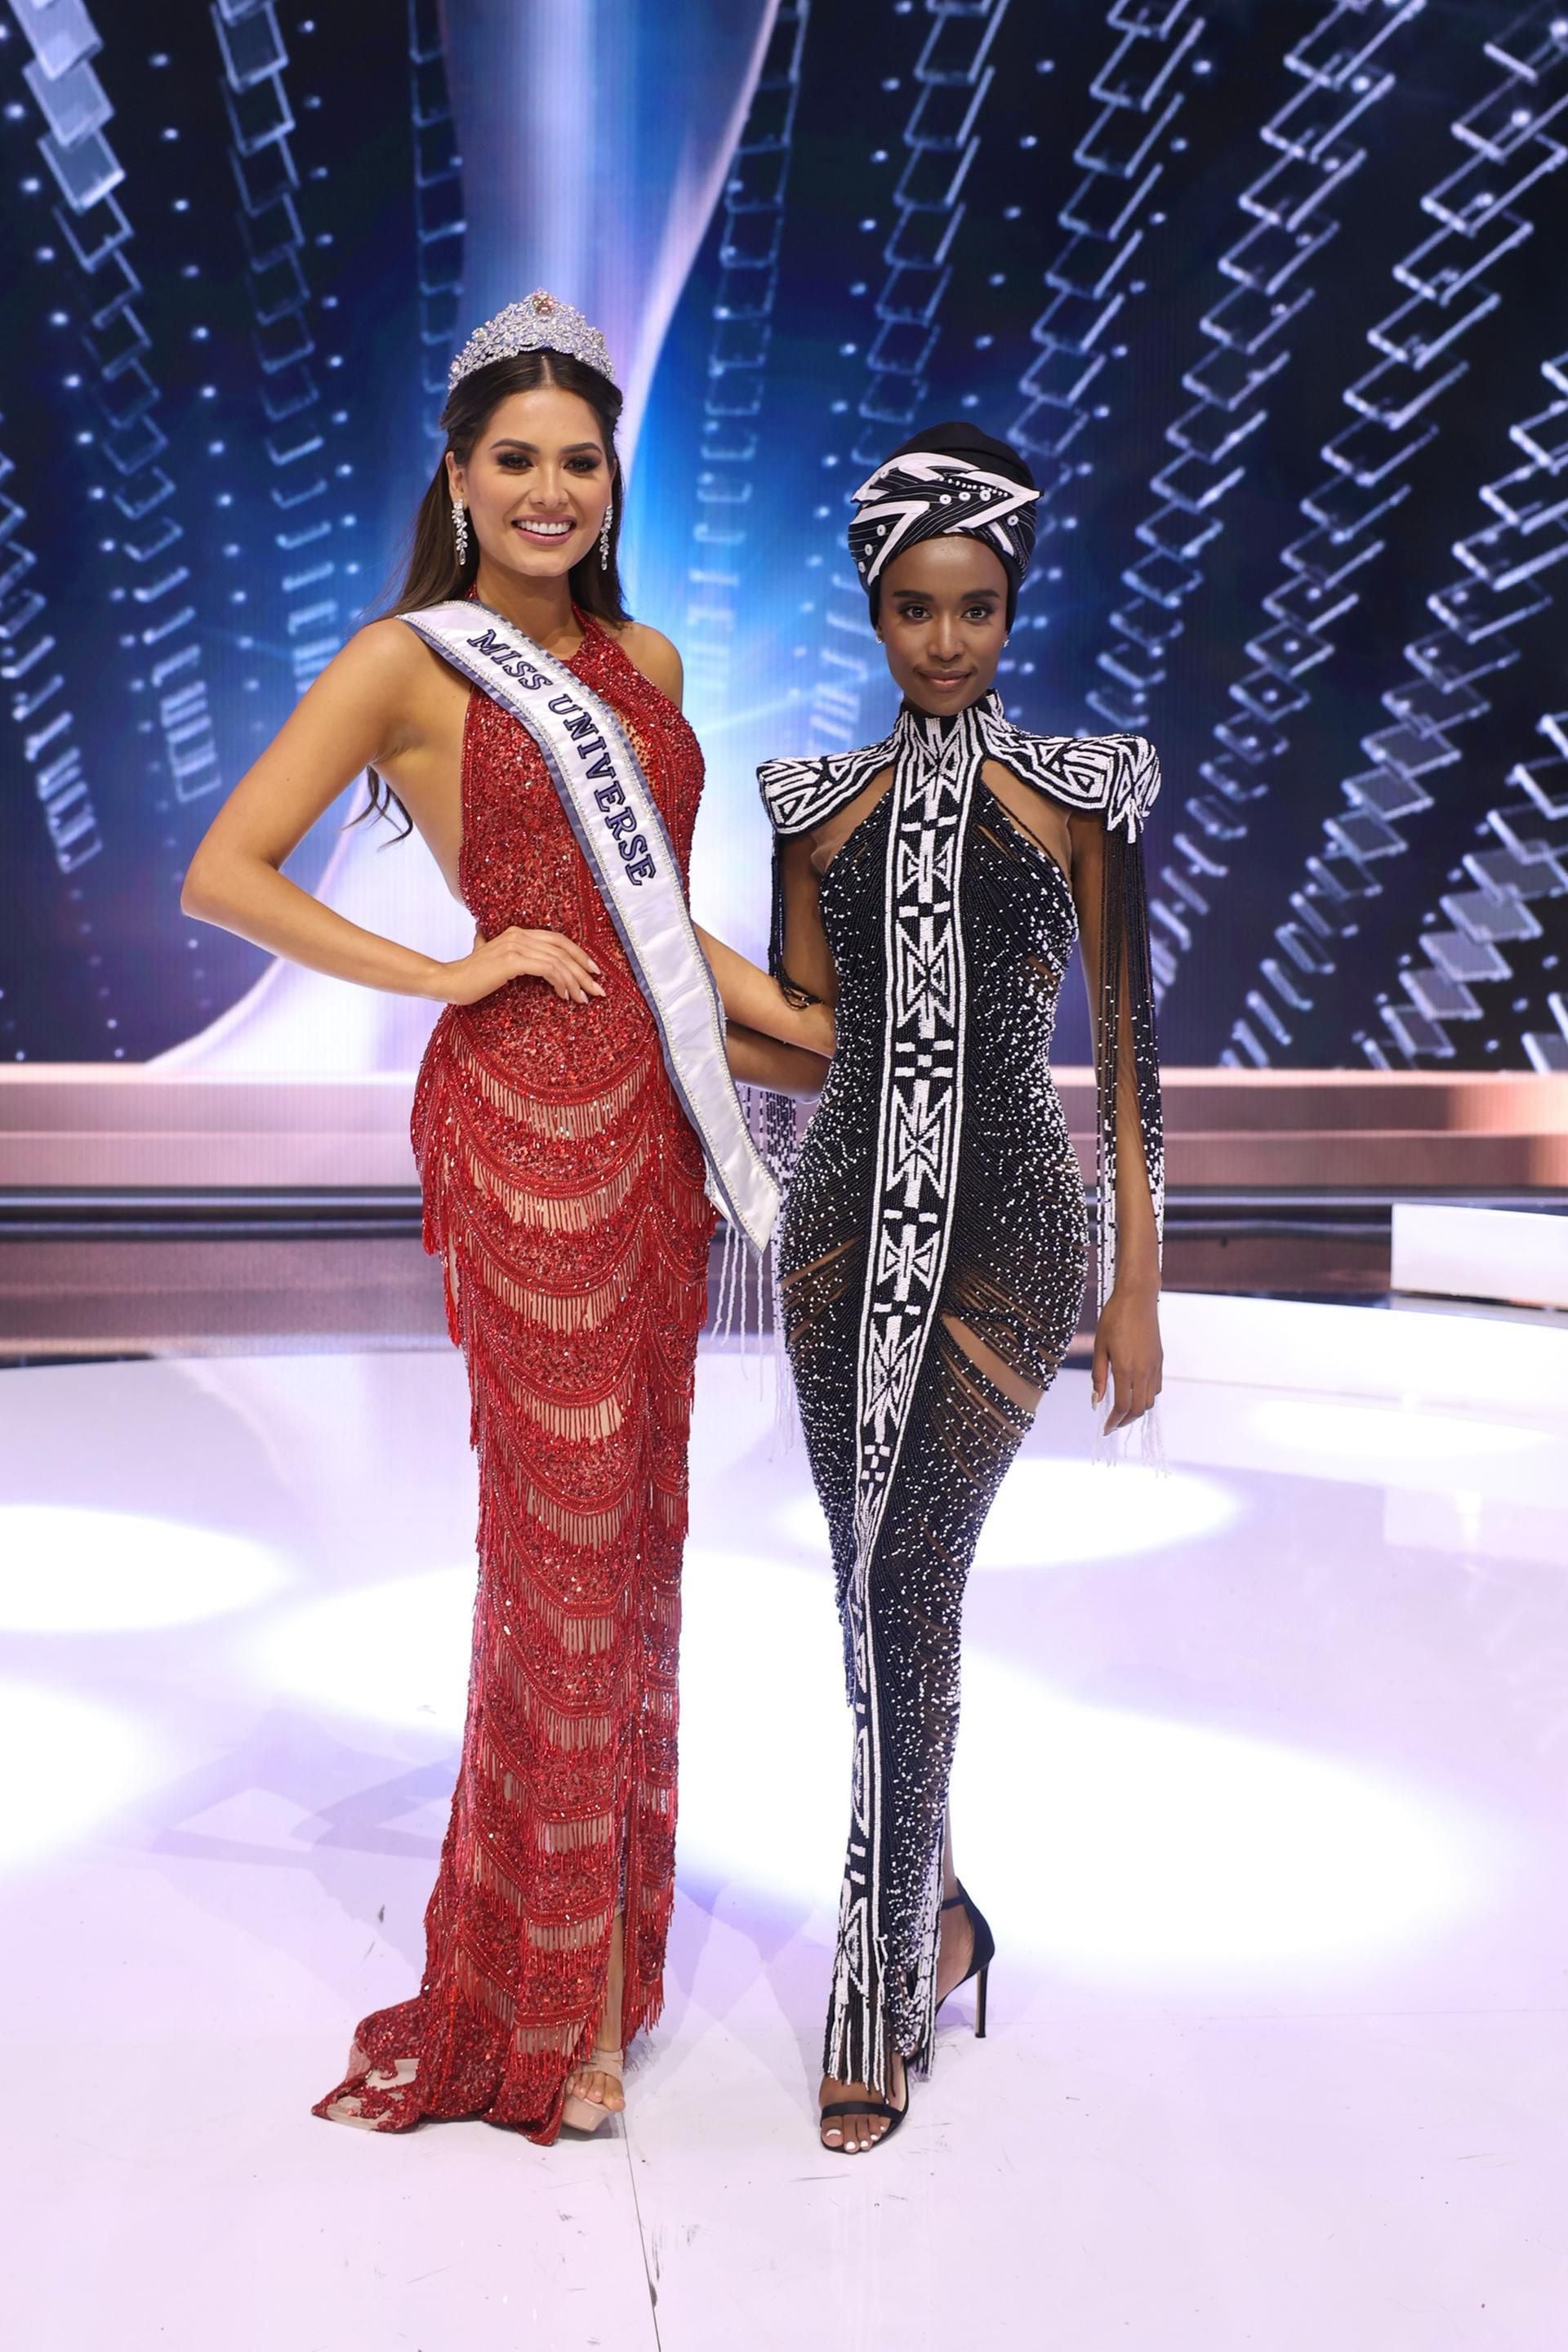 Miss Universe The Stories Behind Some Of The Gowns At This Year S Pageant